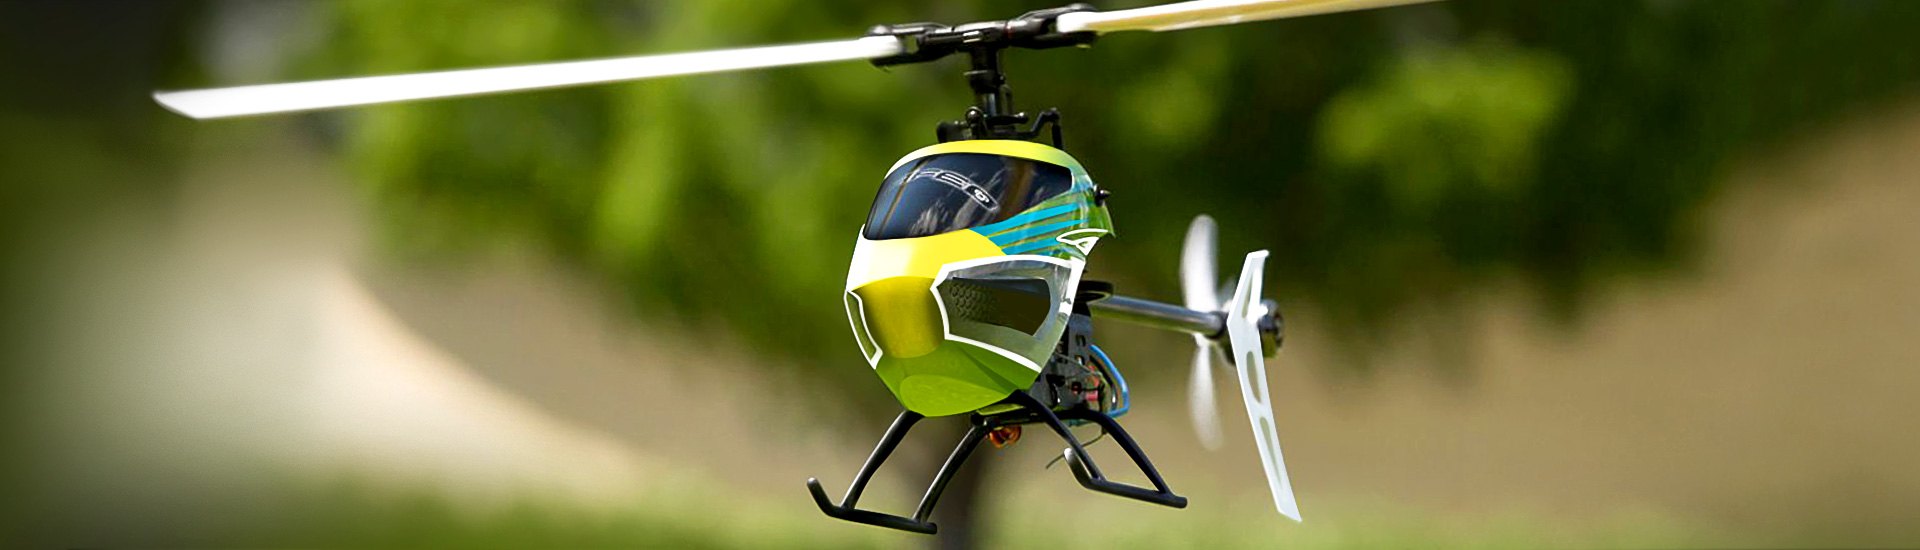 RC Helicopters and Boats | Flying and Sailing Fun on a Budget